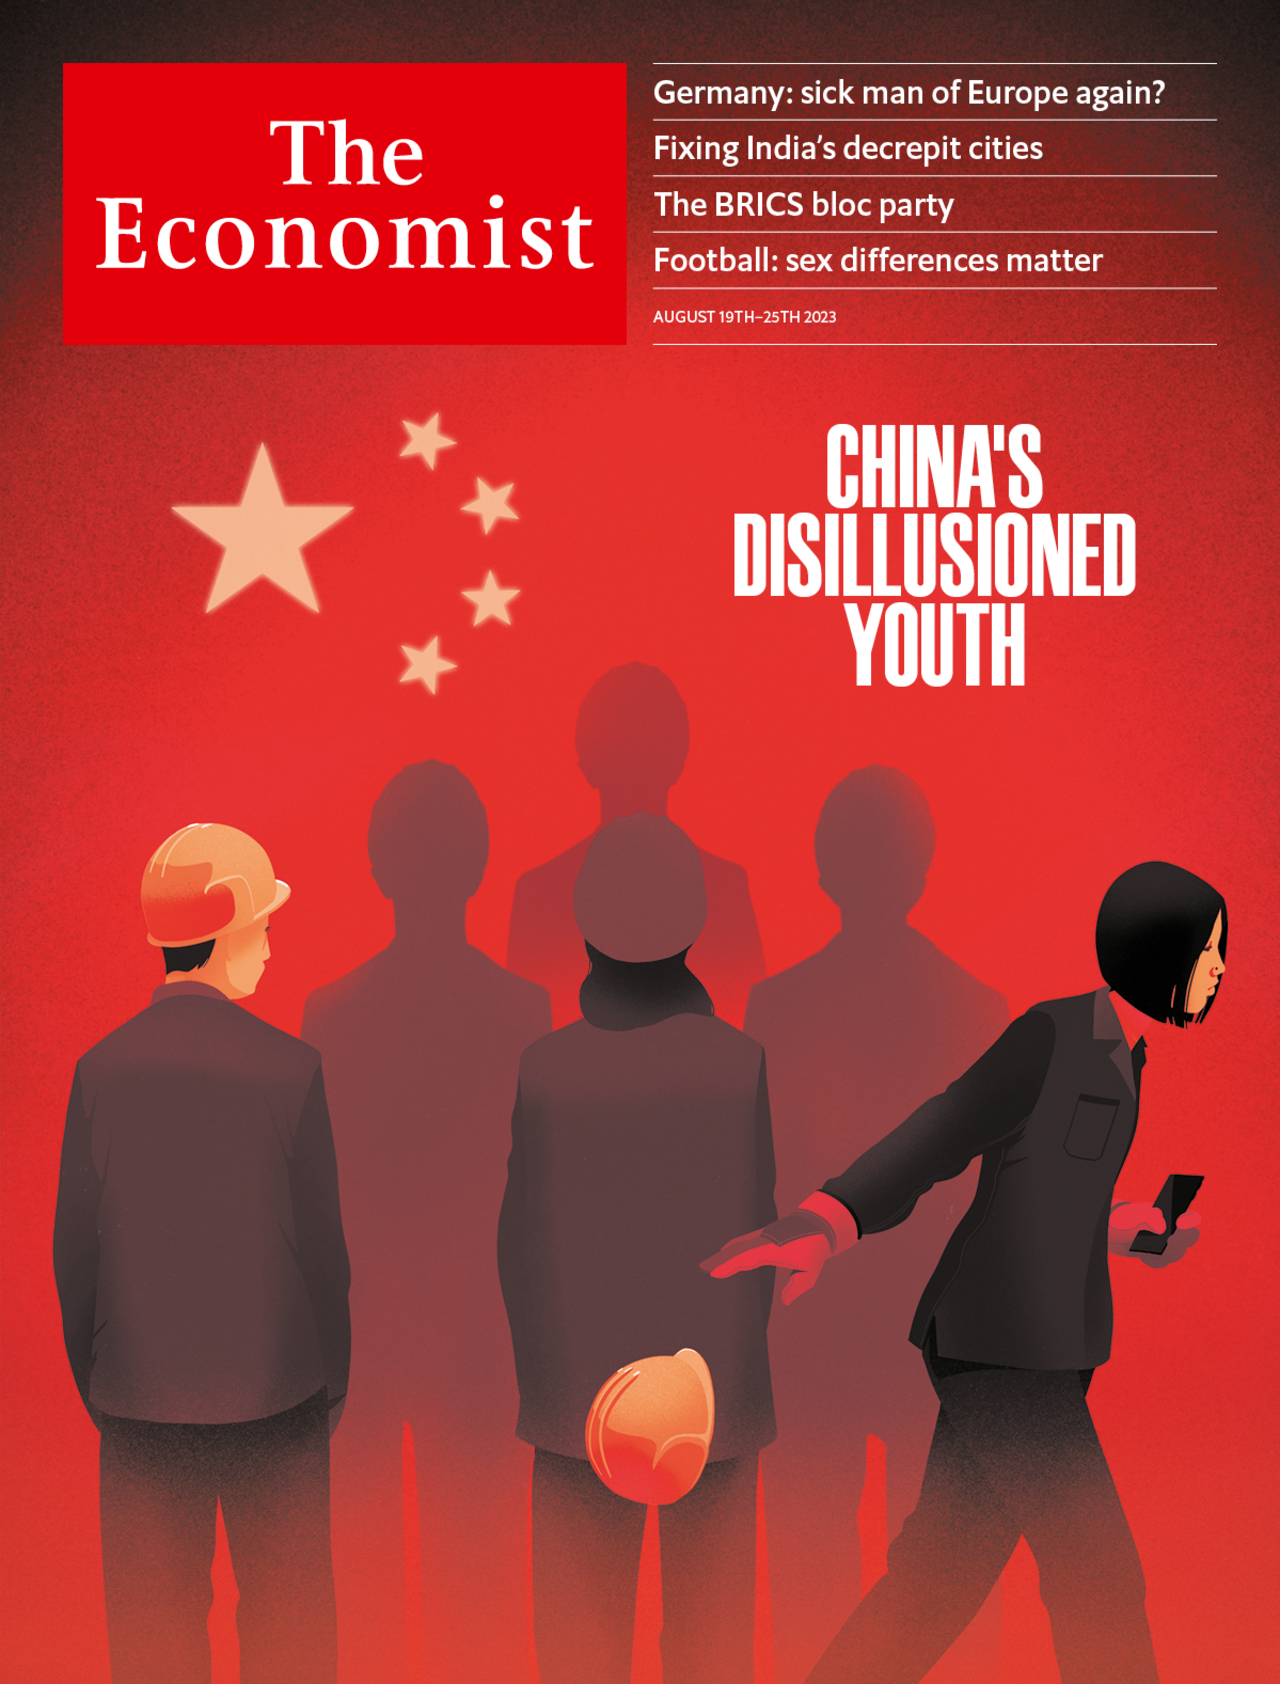 China’s disillusioned youth